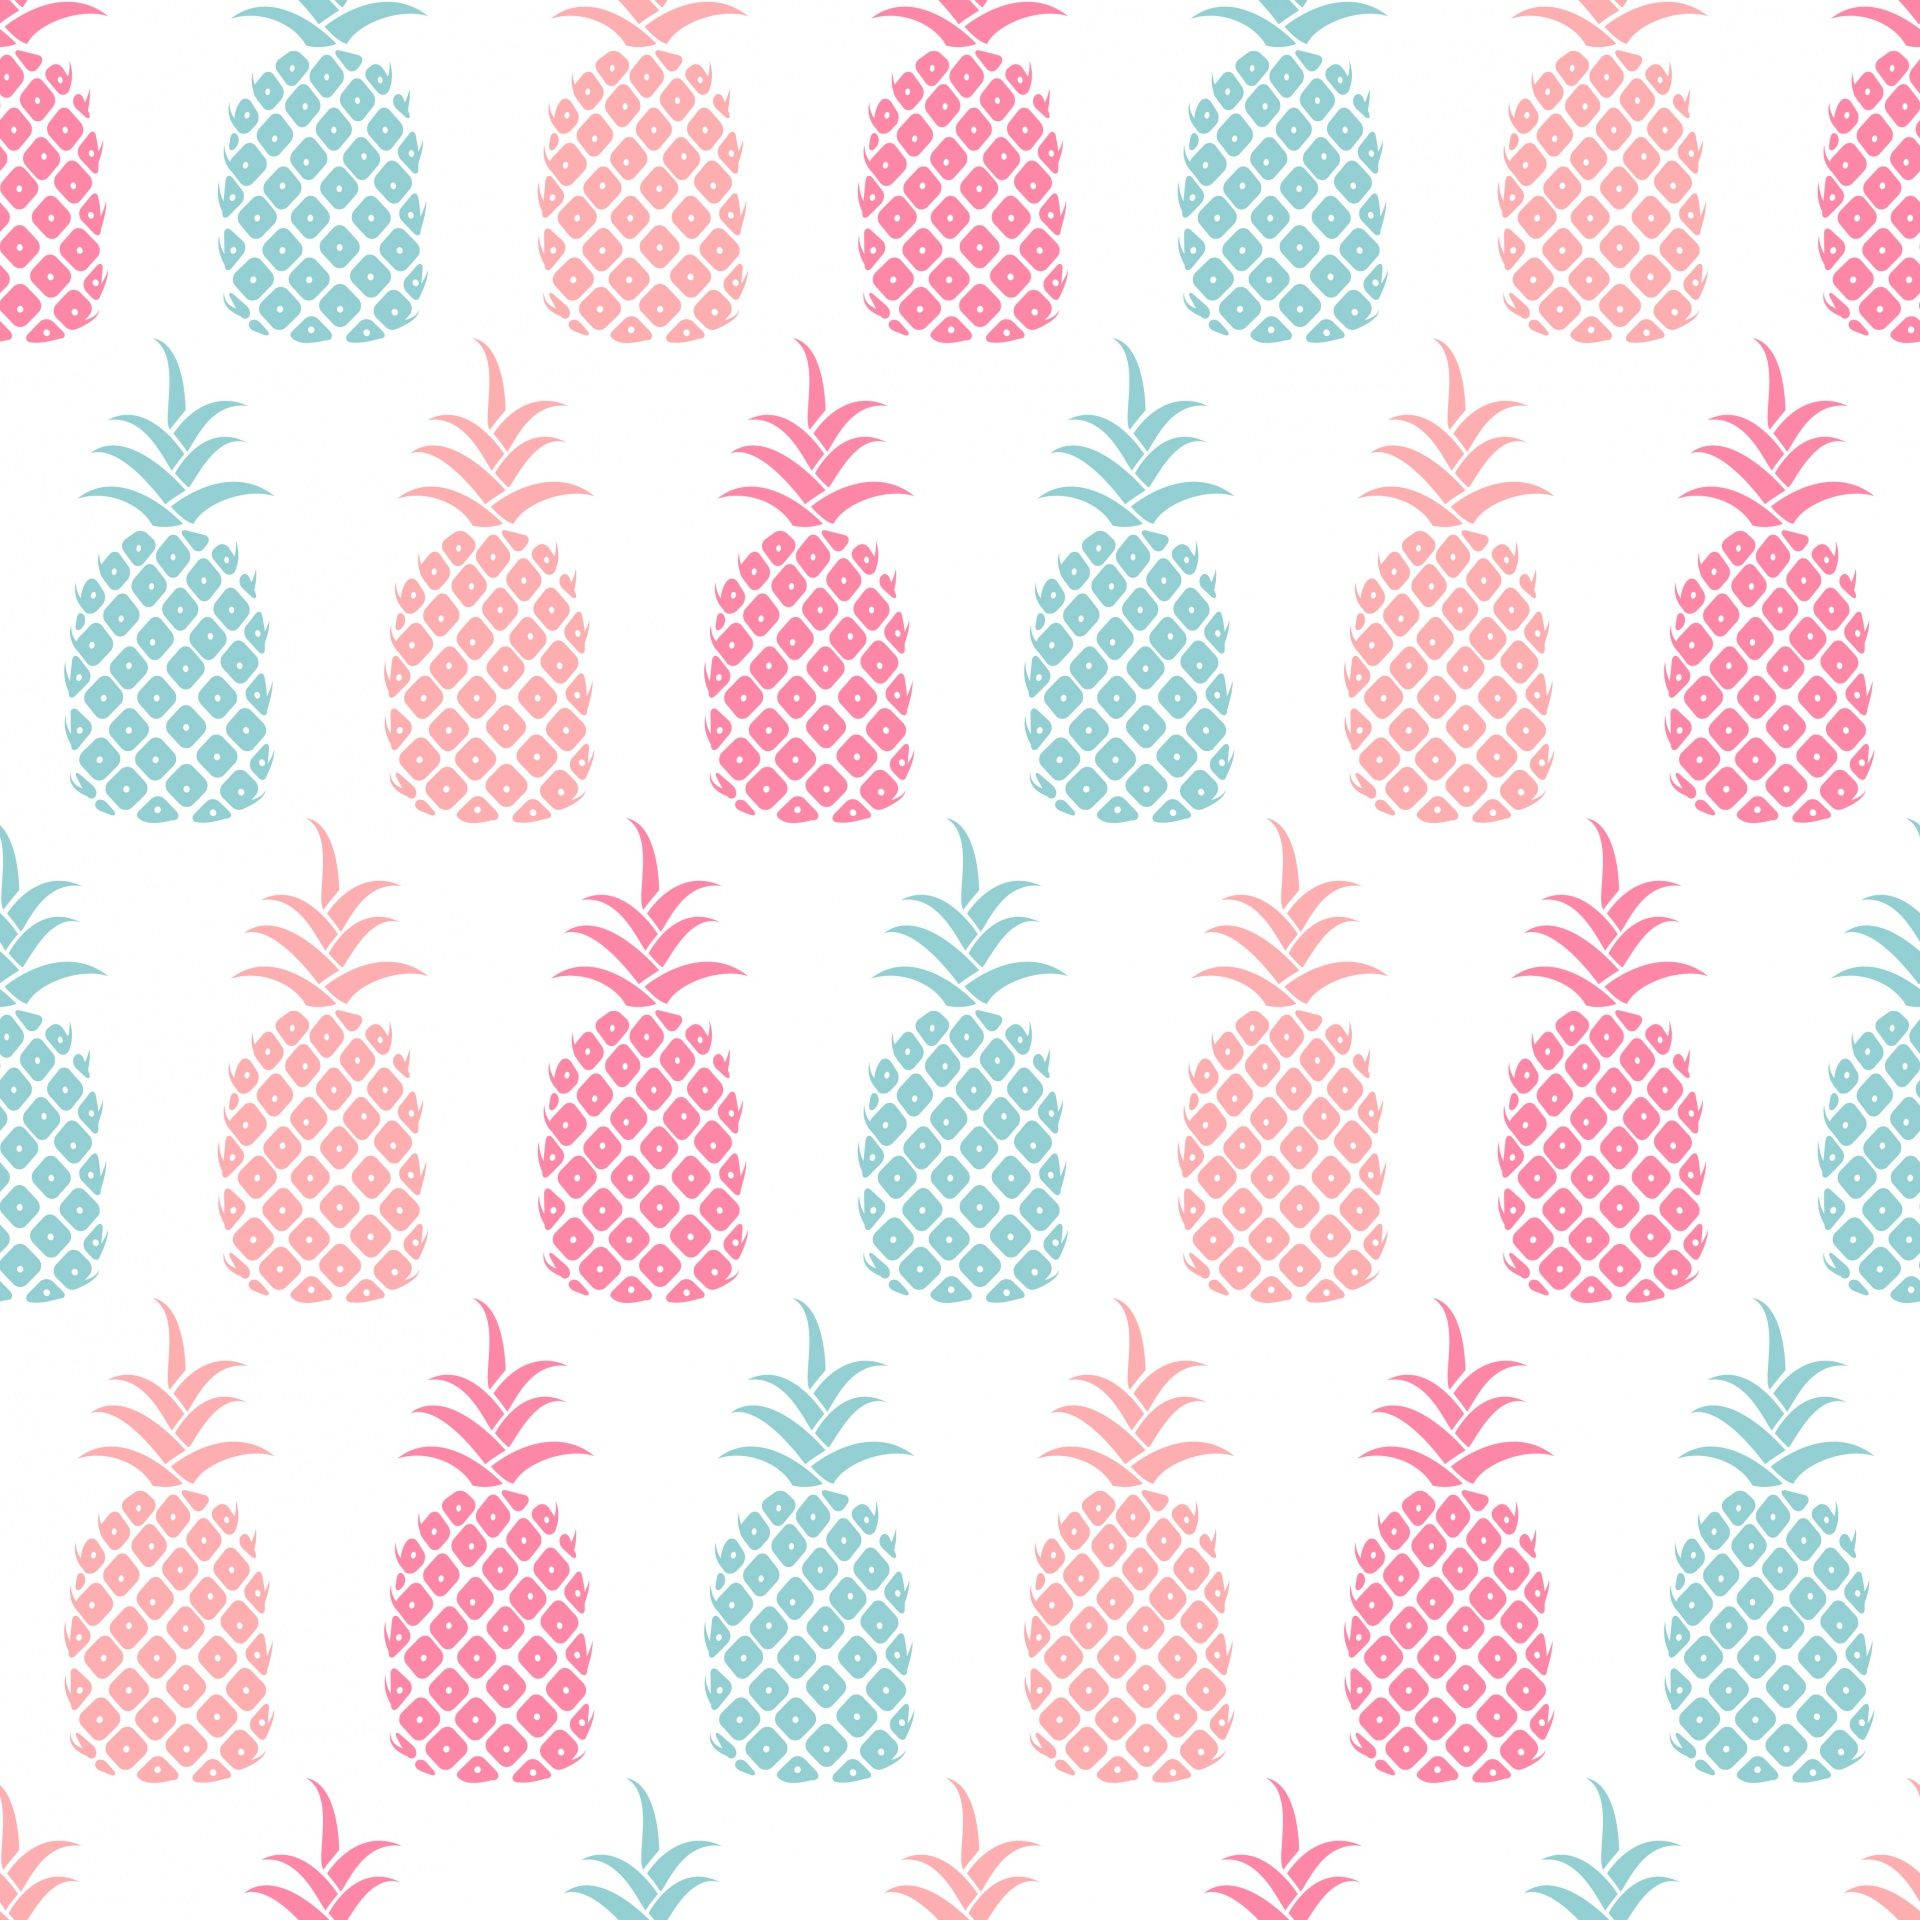 Add Some Sweetness to Your Life with Pineapple Wallpaper